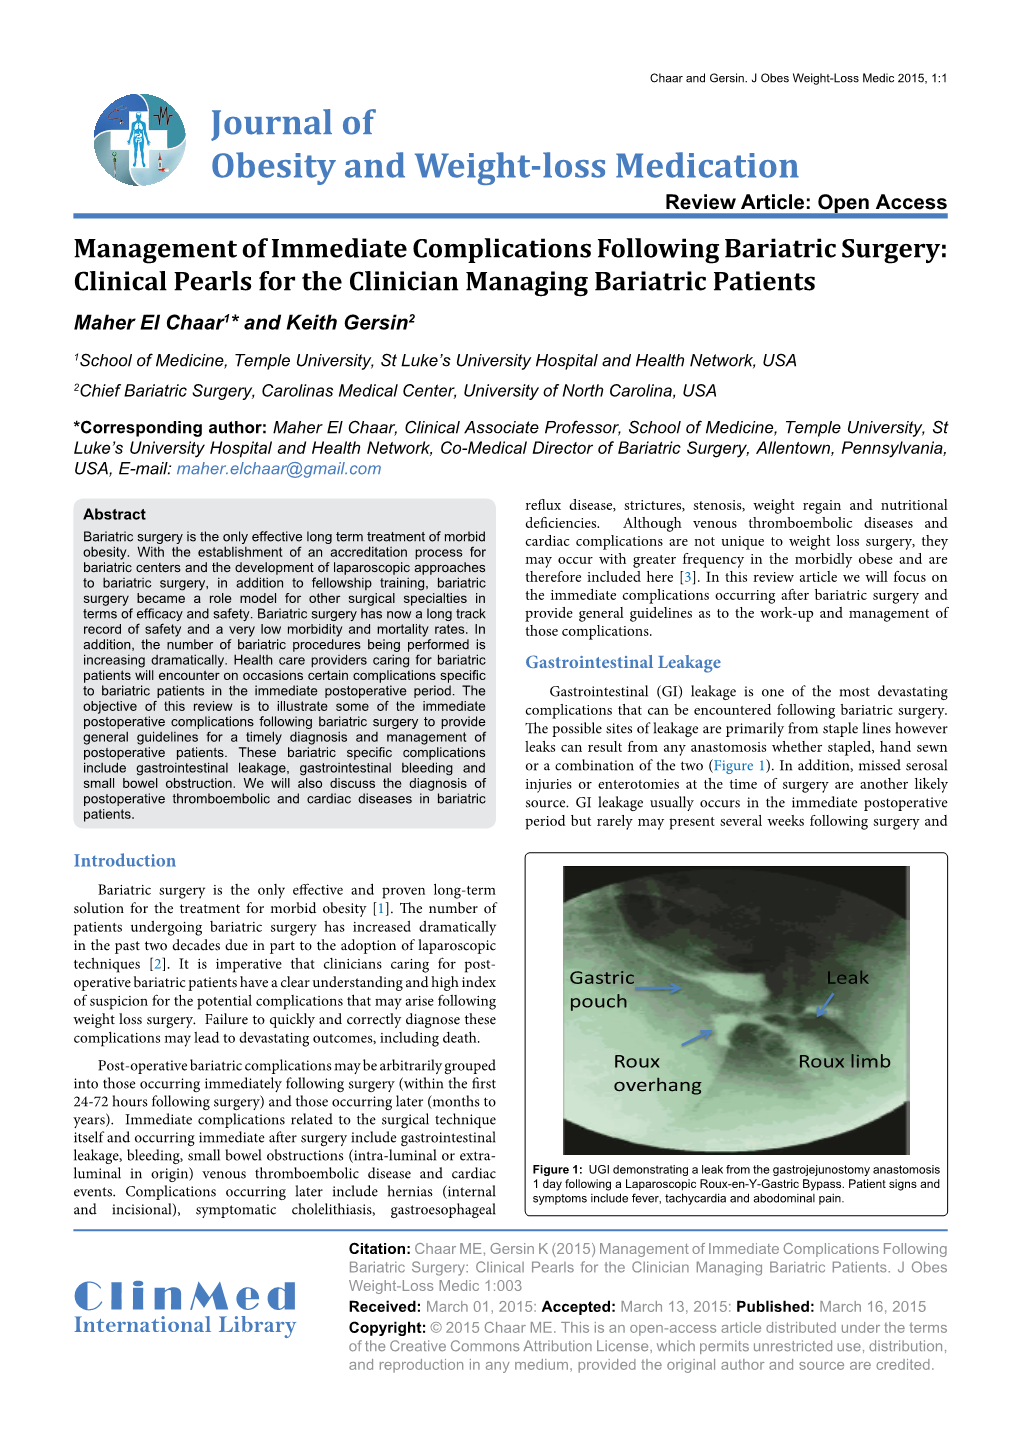 Management of Immediate Complications Following Bariatric Surgery: Clinical Pearls for the Clinician Managing Bariatric Patients Maher El Chaar1* and Keith Gersin2